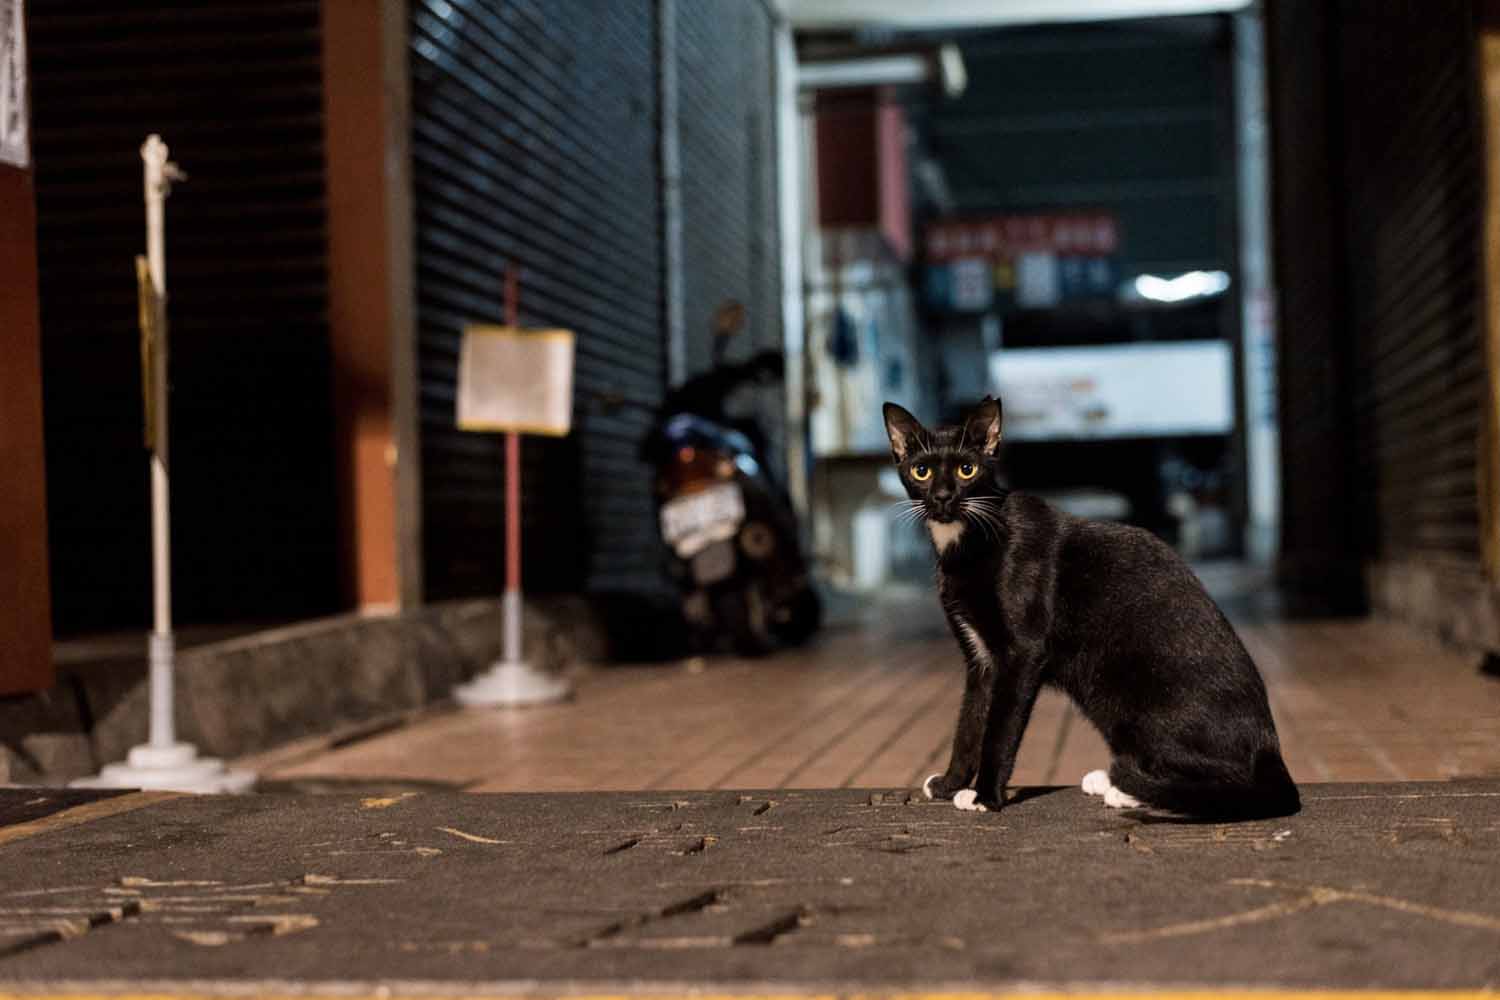 Black cat in an alleyway at night